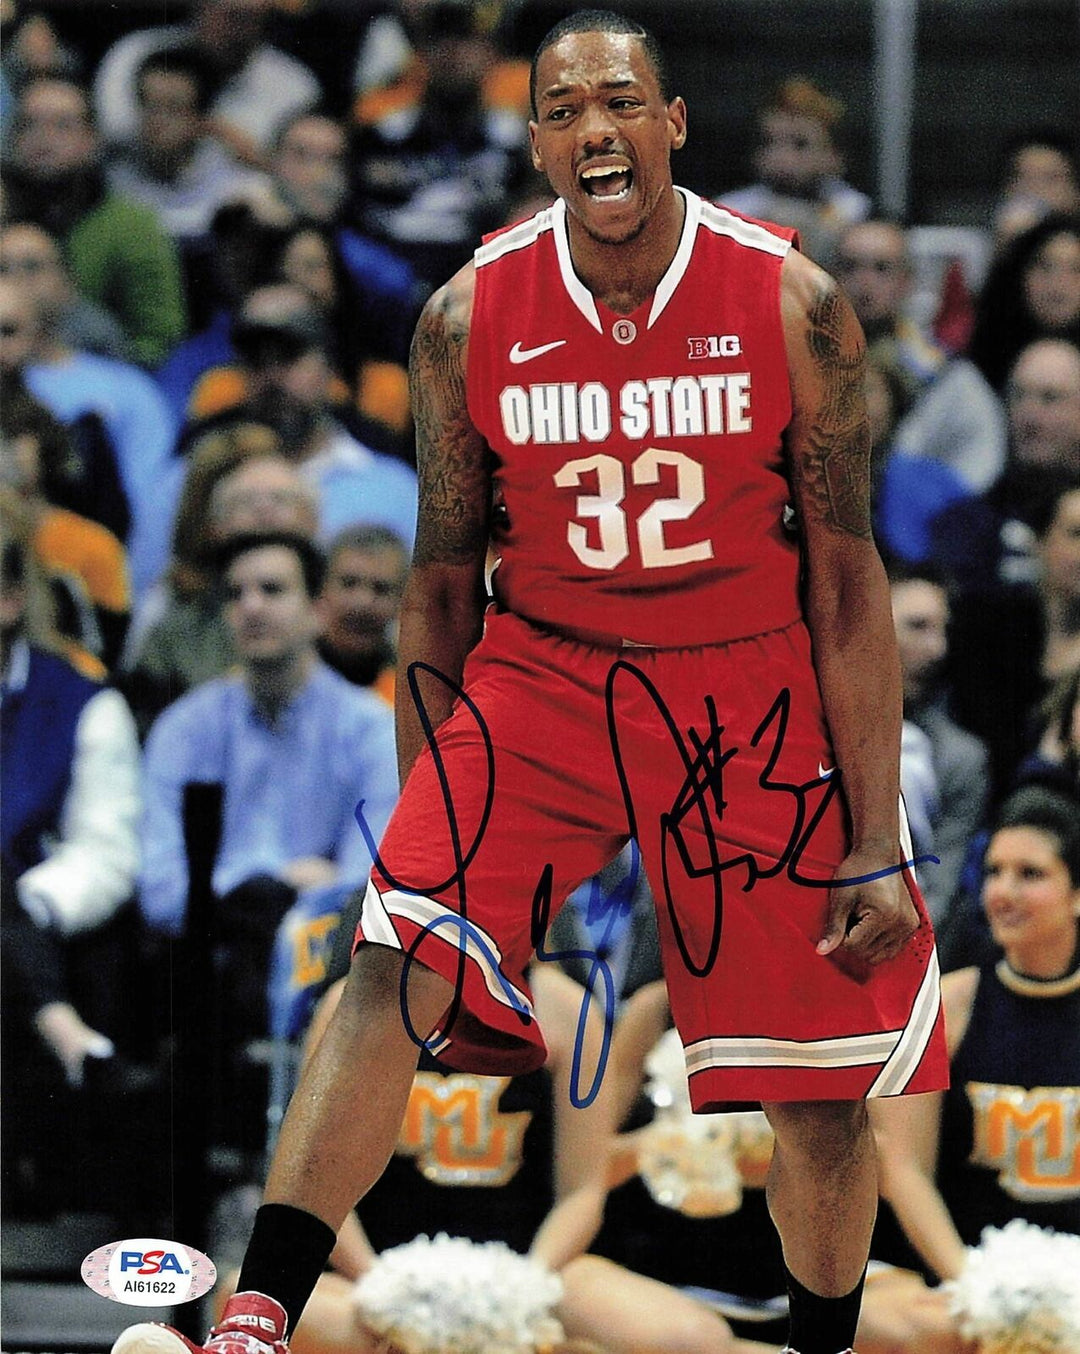 LENZELLE SMITH JR. signed 8x10 Photo PSA/DNA Ohio State Autographed Image 1